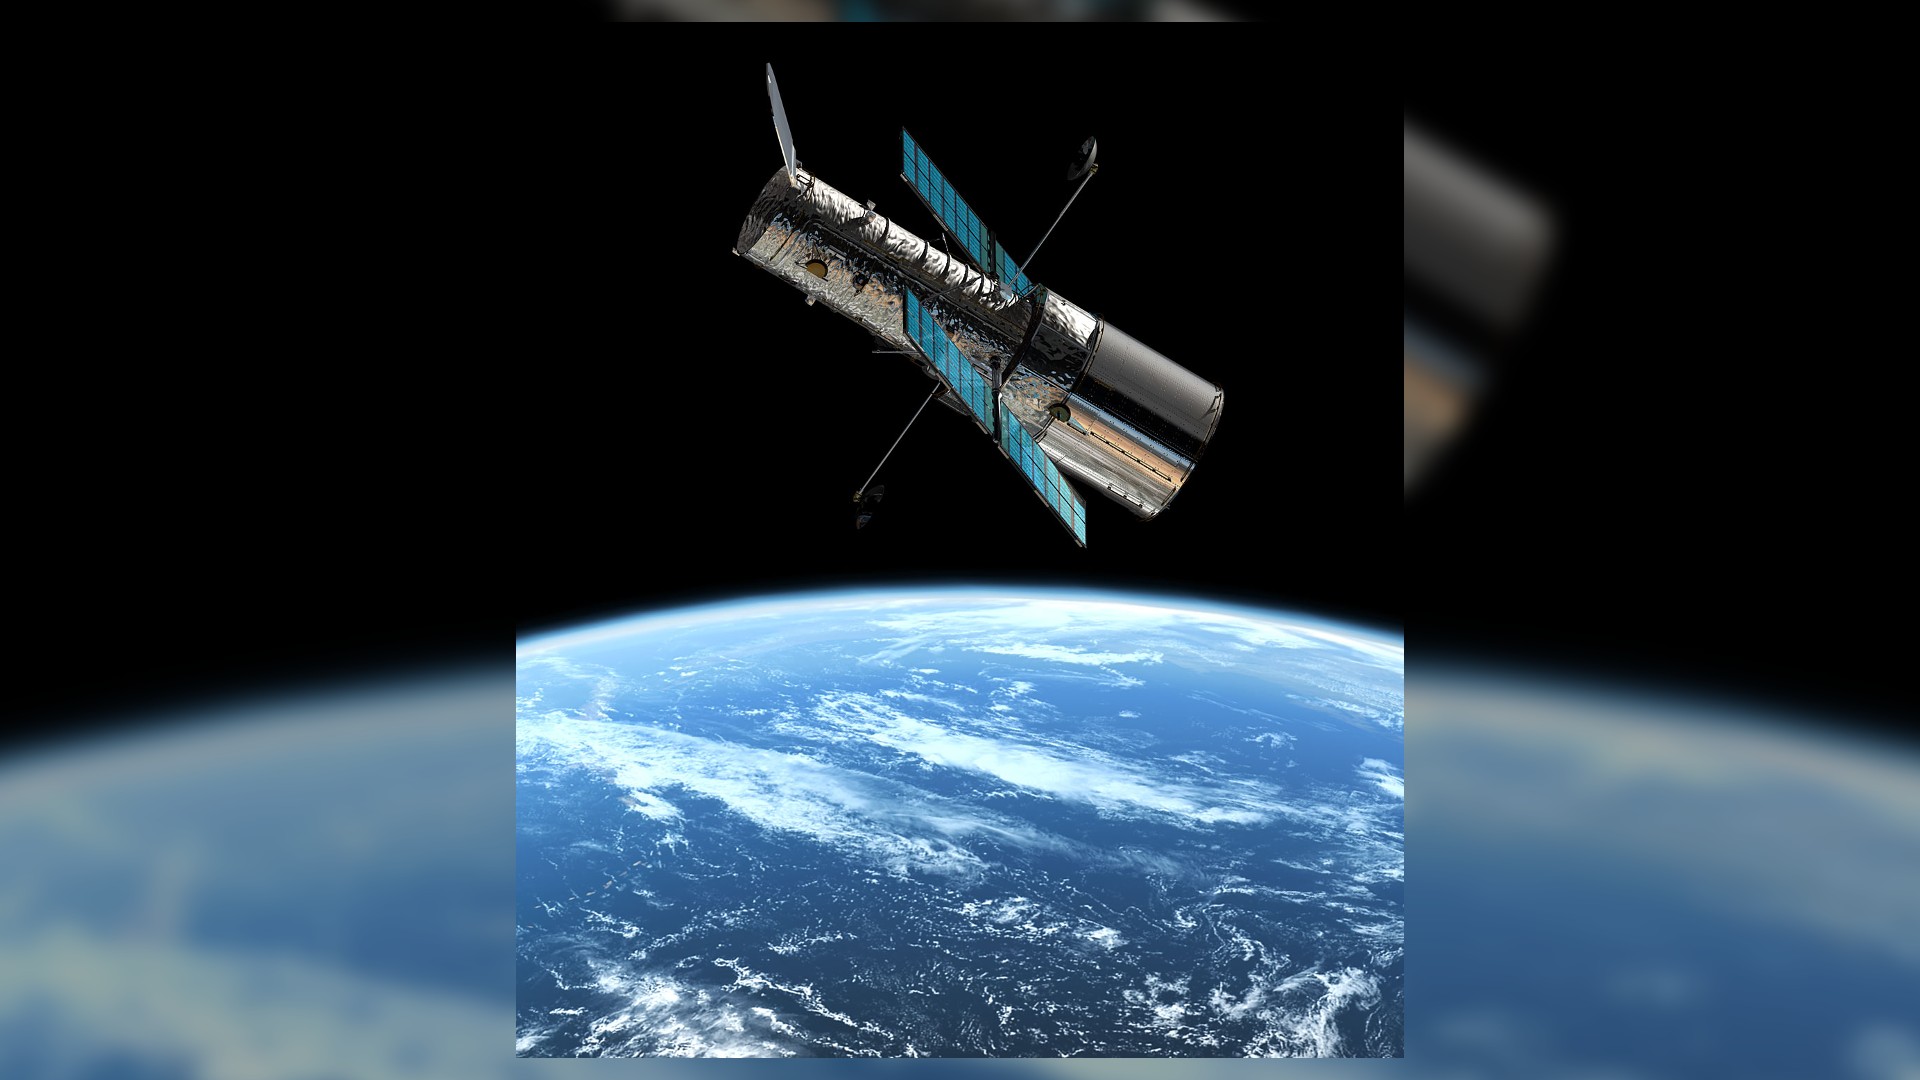 Here we see an image of the Hubble Space Telescope with a big close-up of Earth in the background. It is a massive cylindrical telescope with 2 antenna and solar panels on either side.